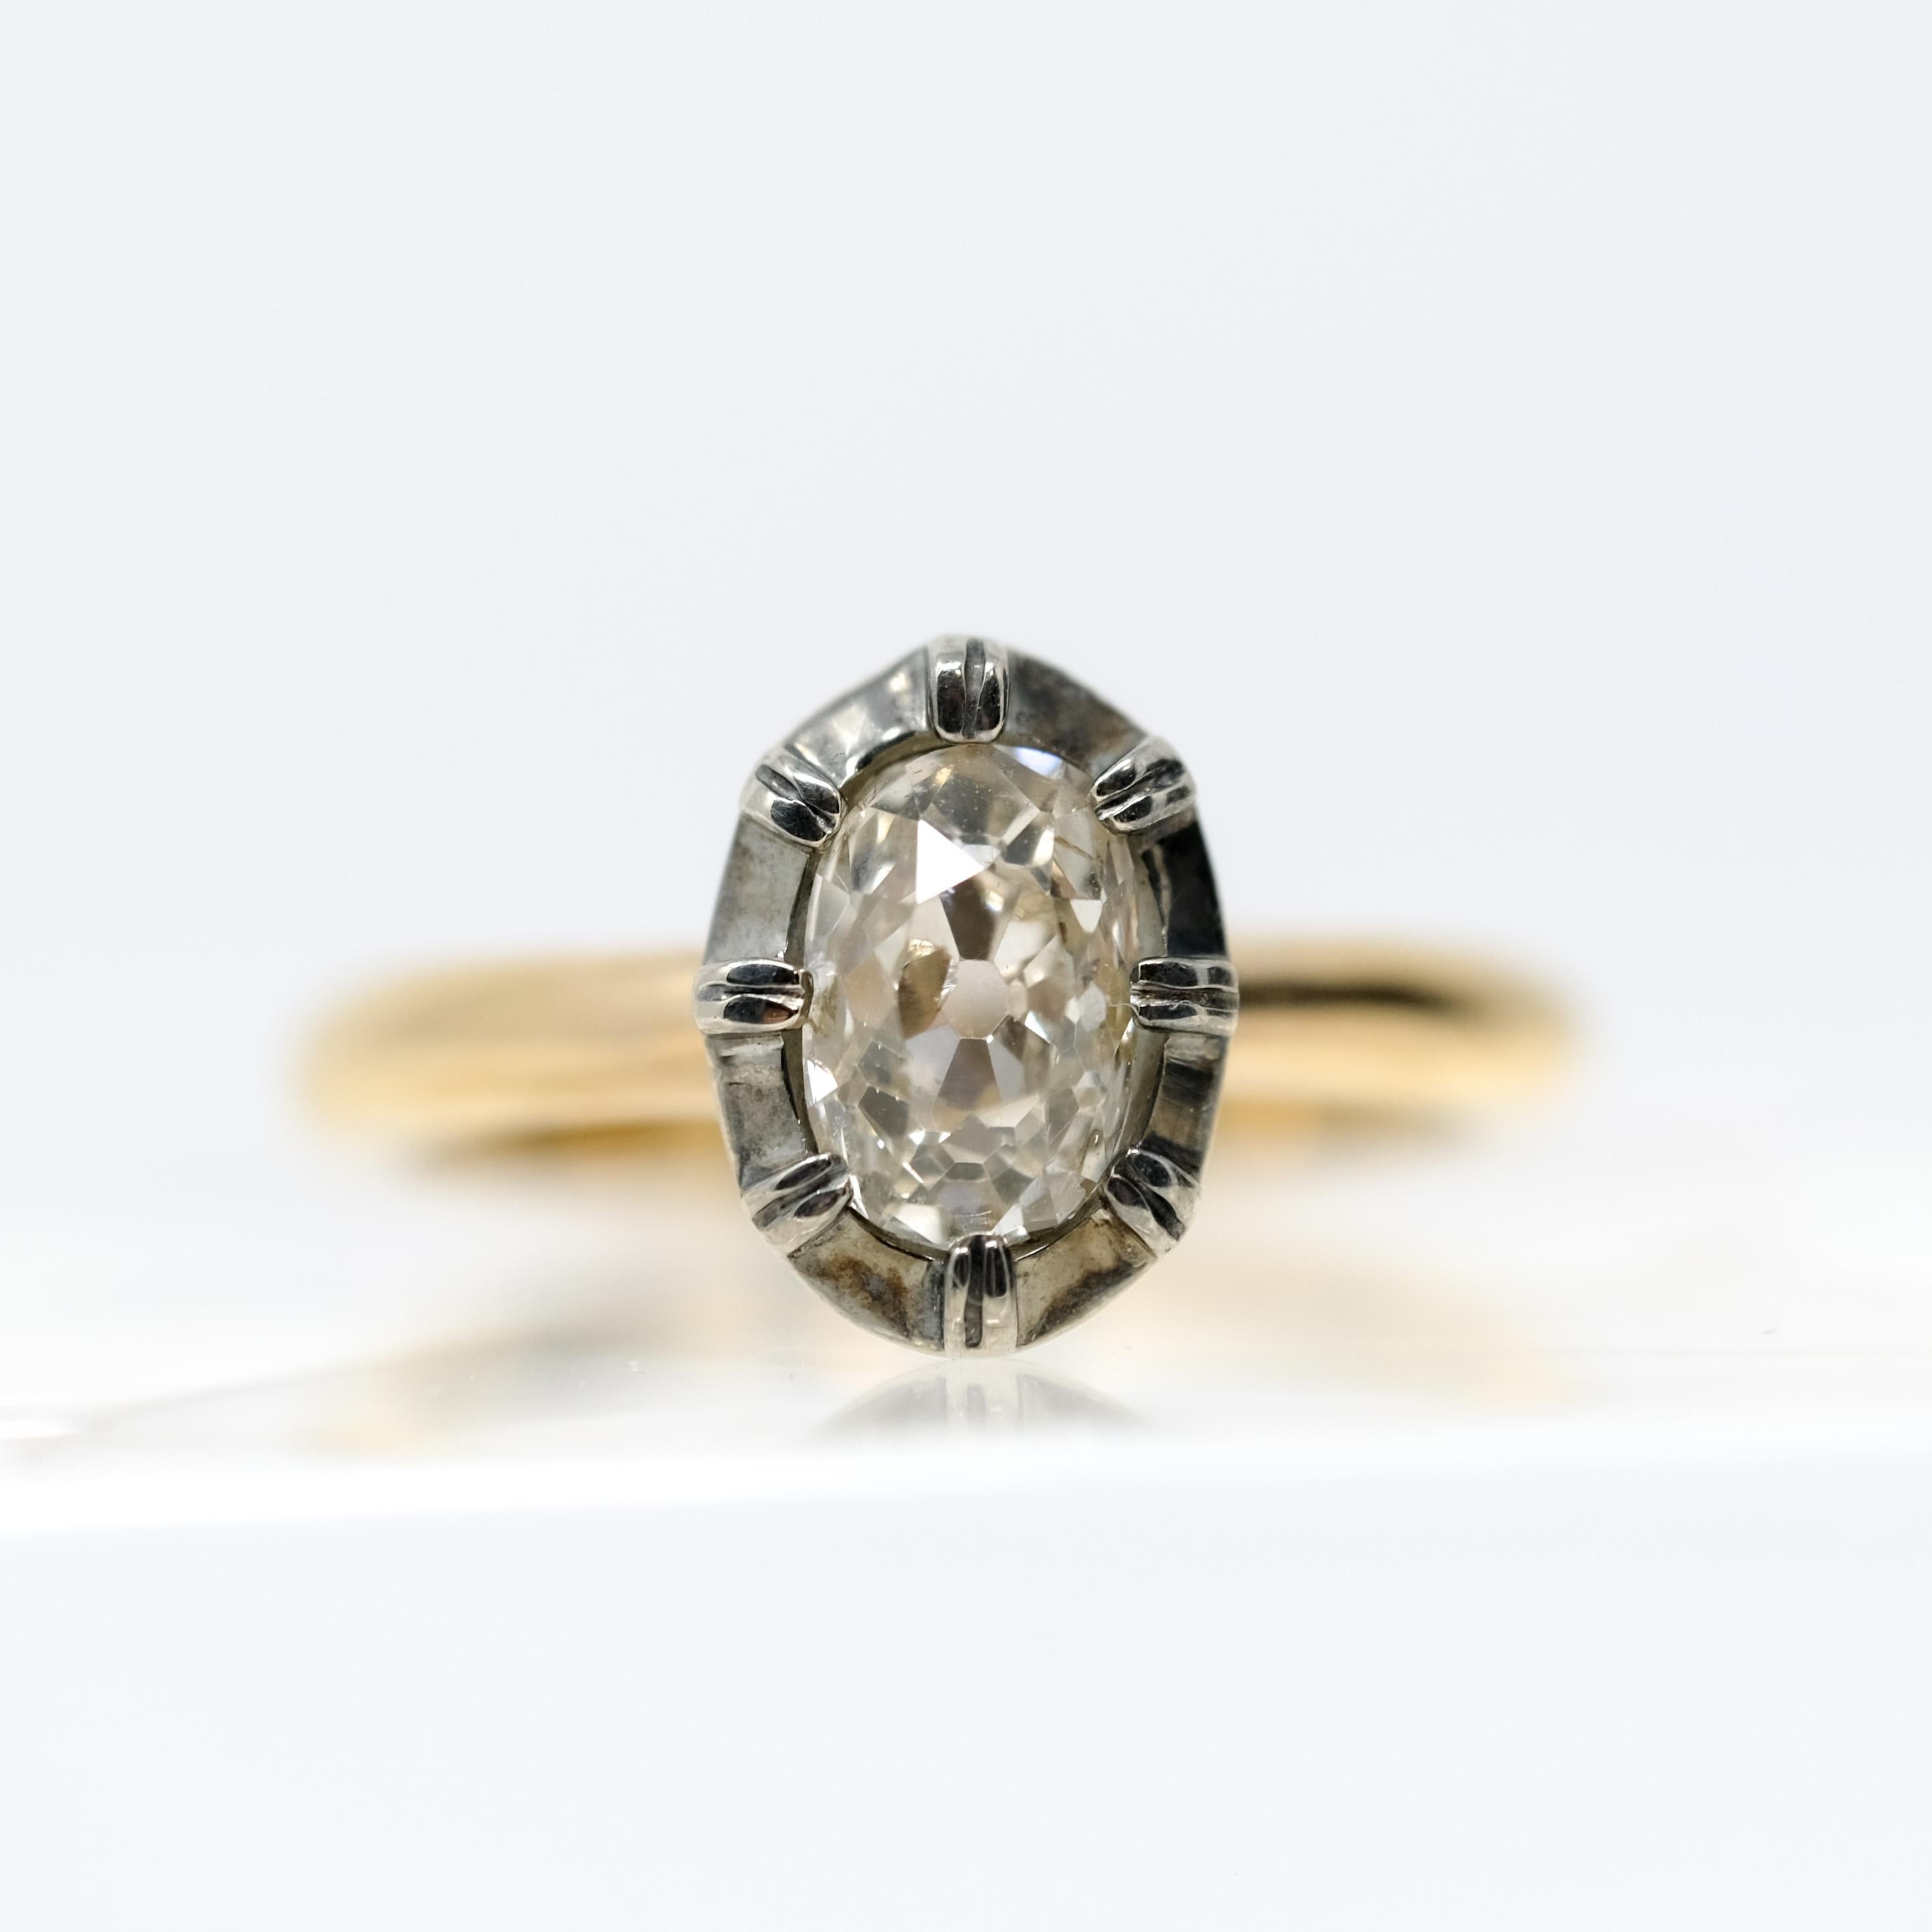 1.35 carat reclaimed chunky antique Old Mine Cut diamond in 19K gold setting
Shank is 18K gold